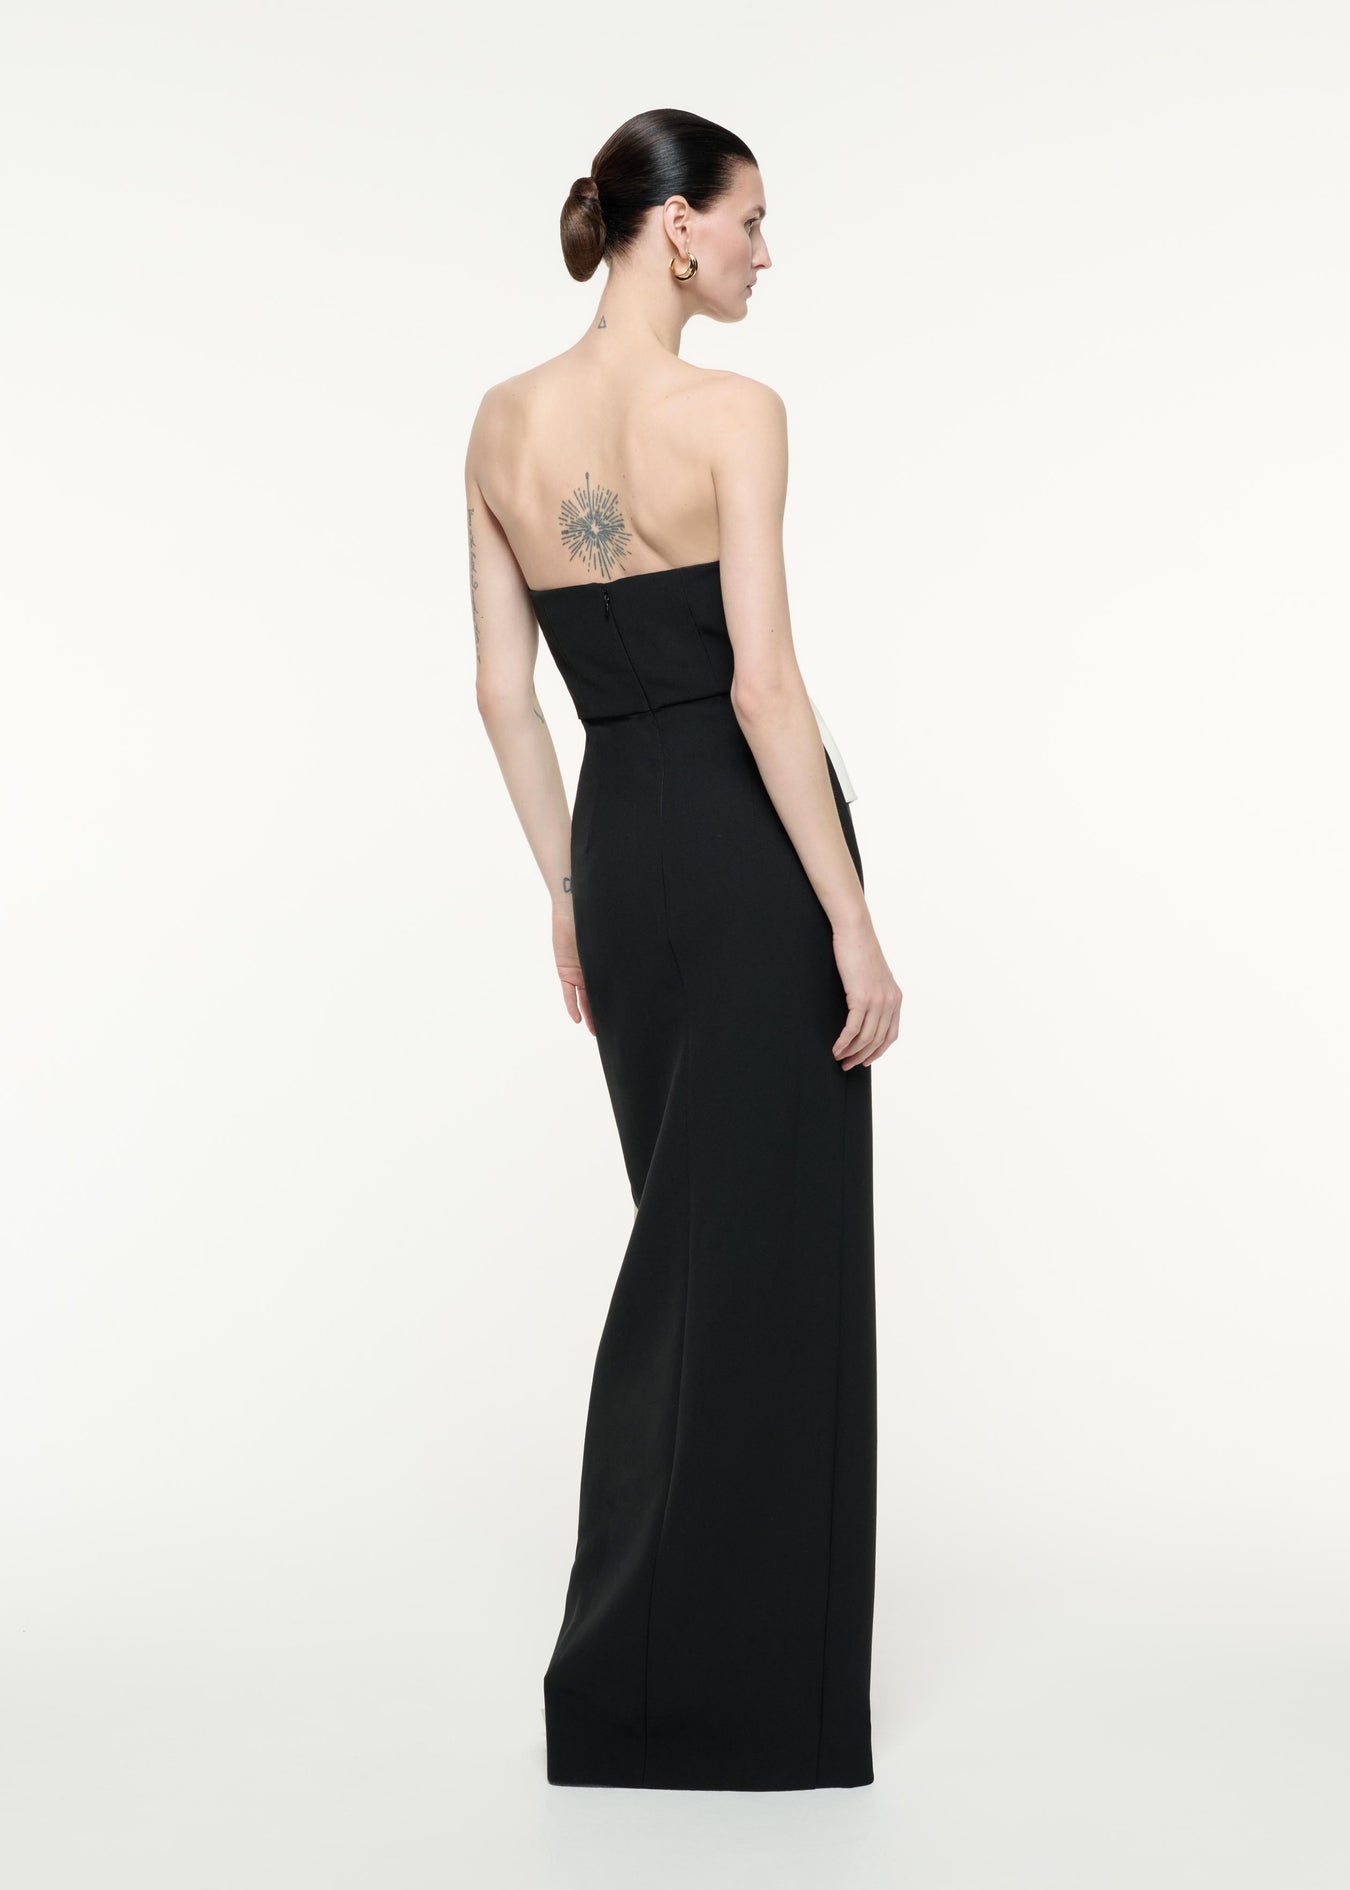 A back view image of a model wearing the Strapless Crepe Gown in Monochrome